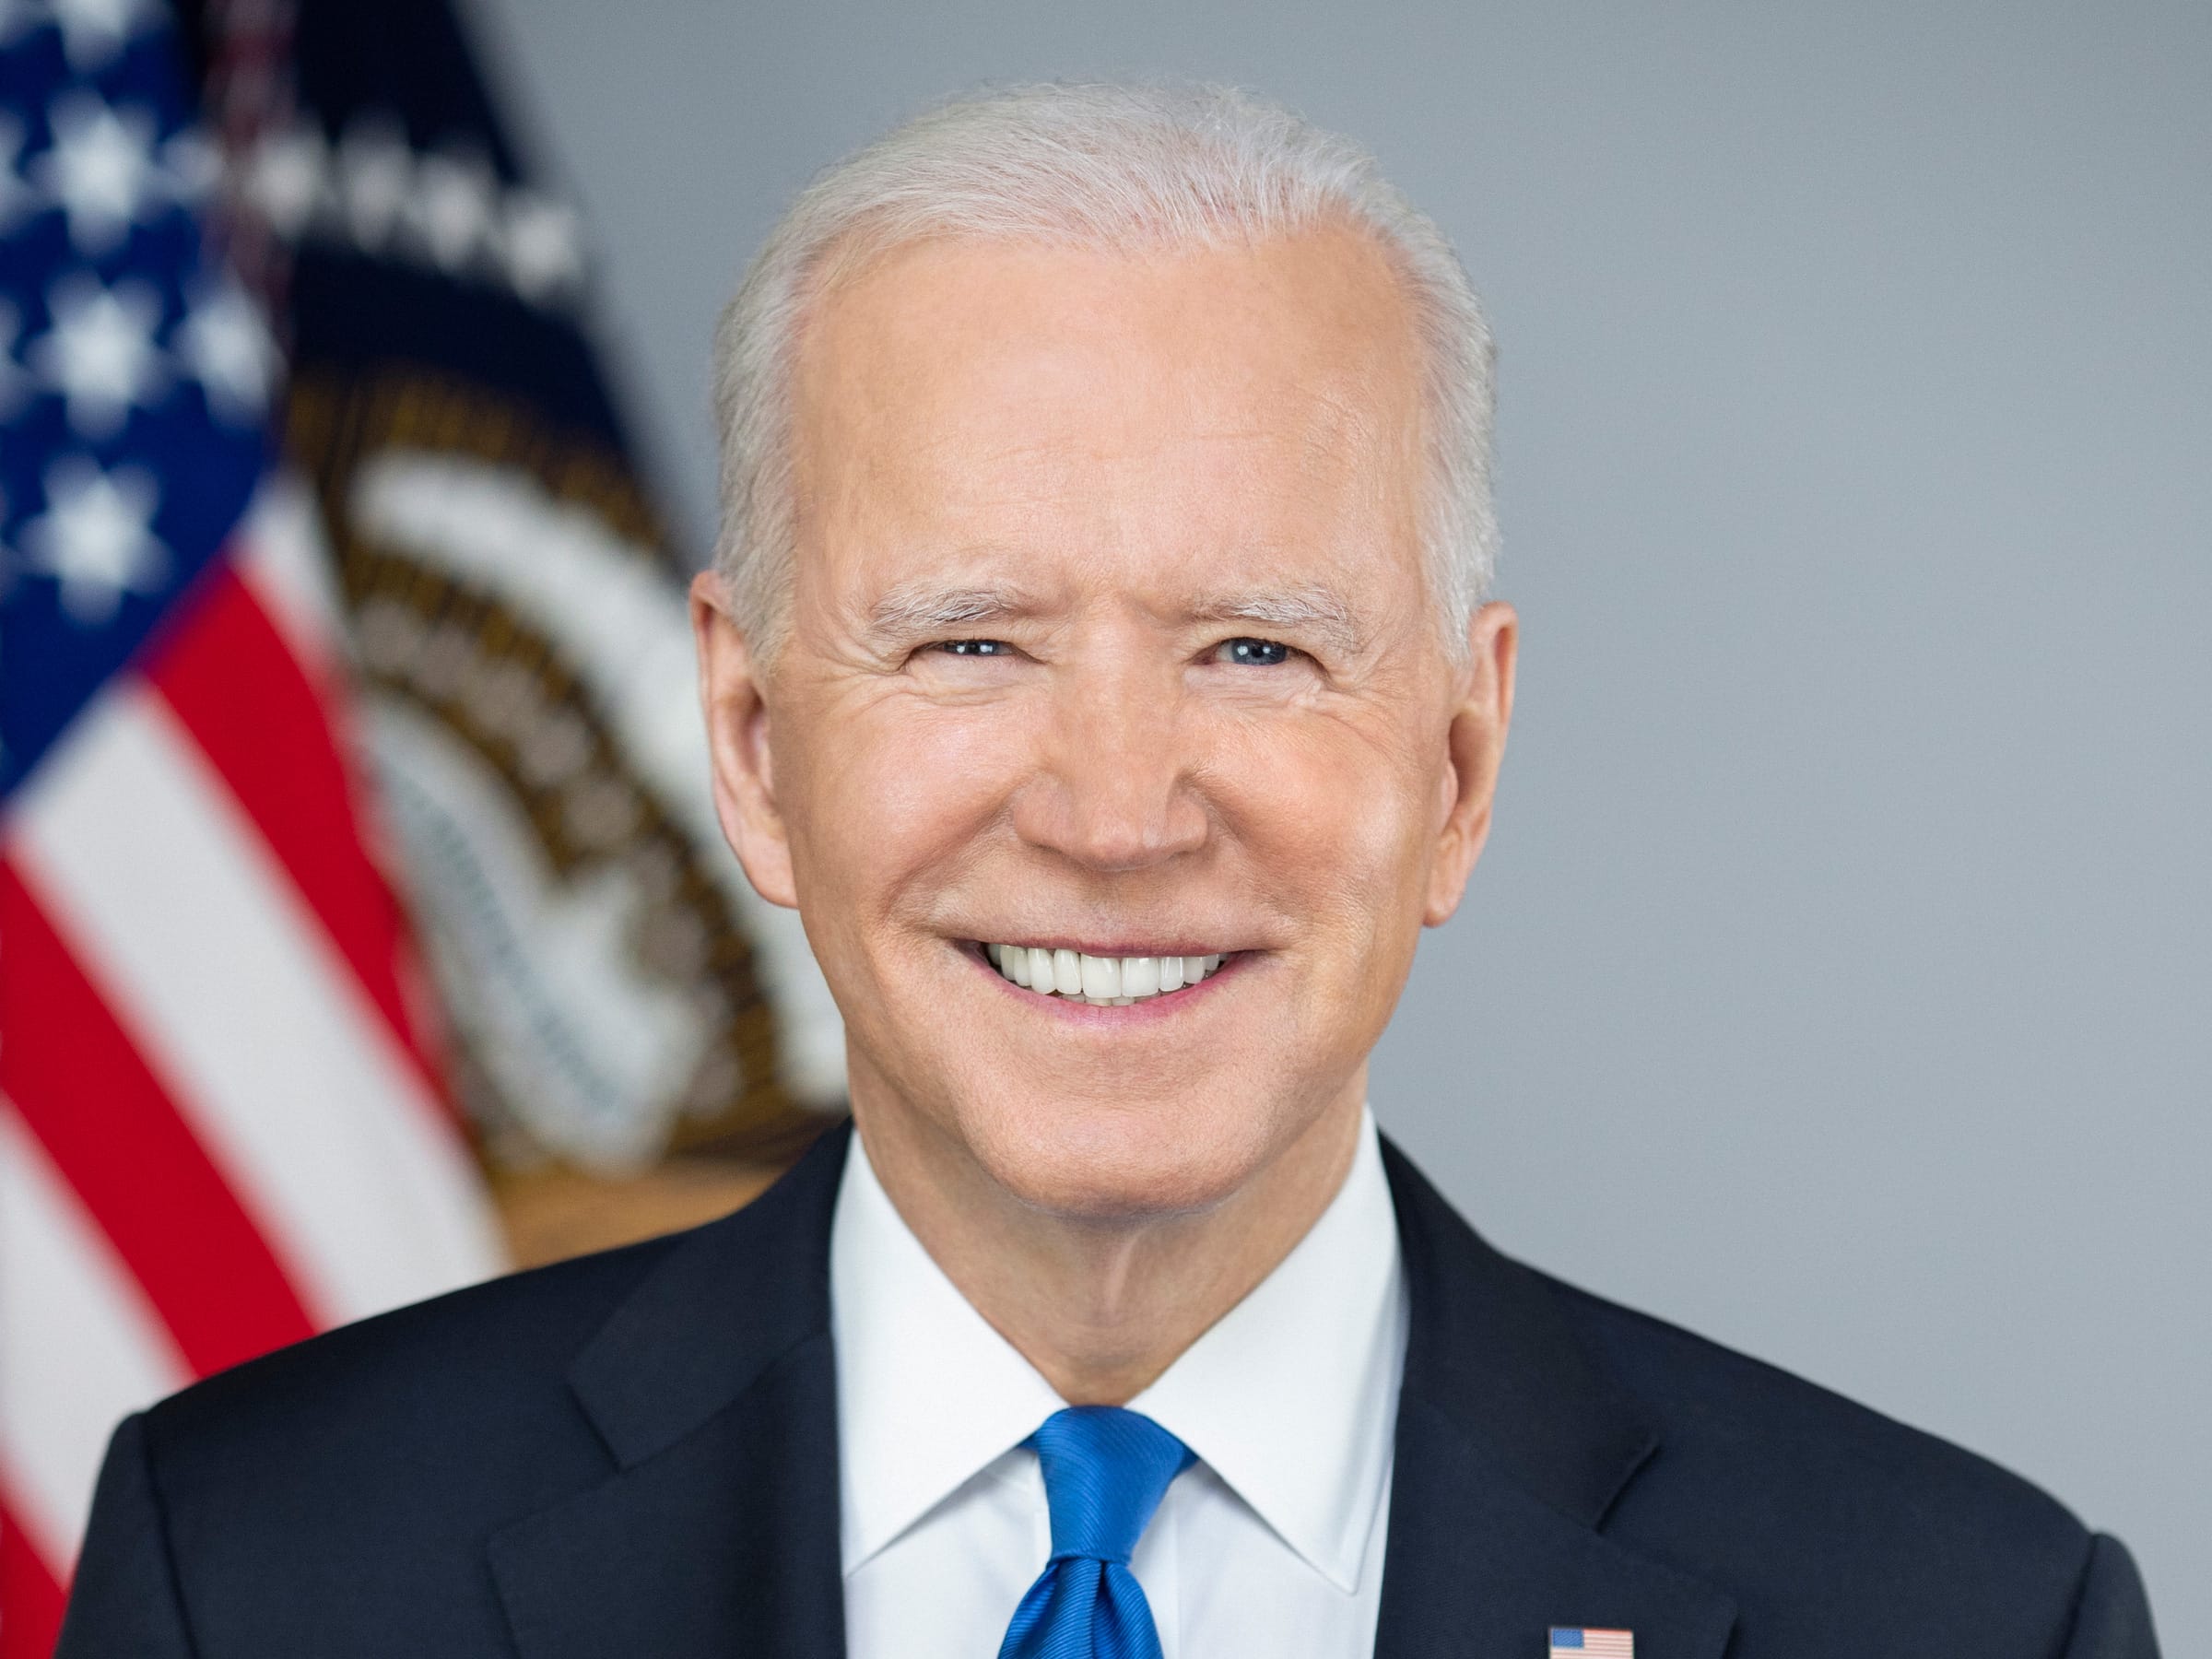 Will Joe Biden’s approval rating be higher than his disapproval rating on any day in 2022?